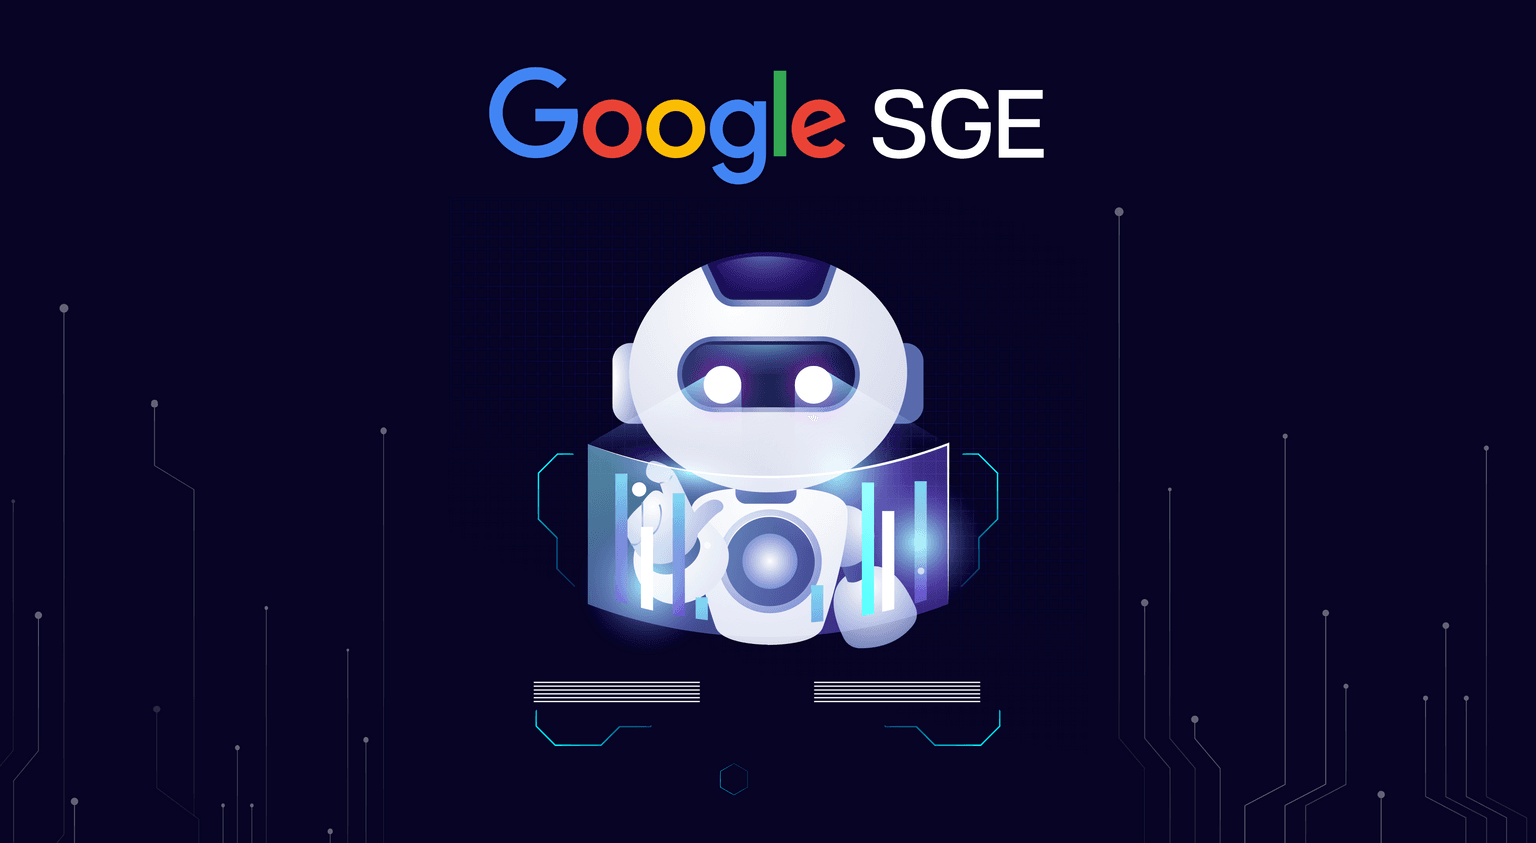 Future of Search: How Google SGE is Transforming Content Discovery and Engagement